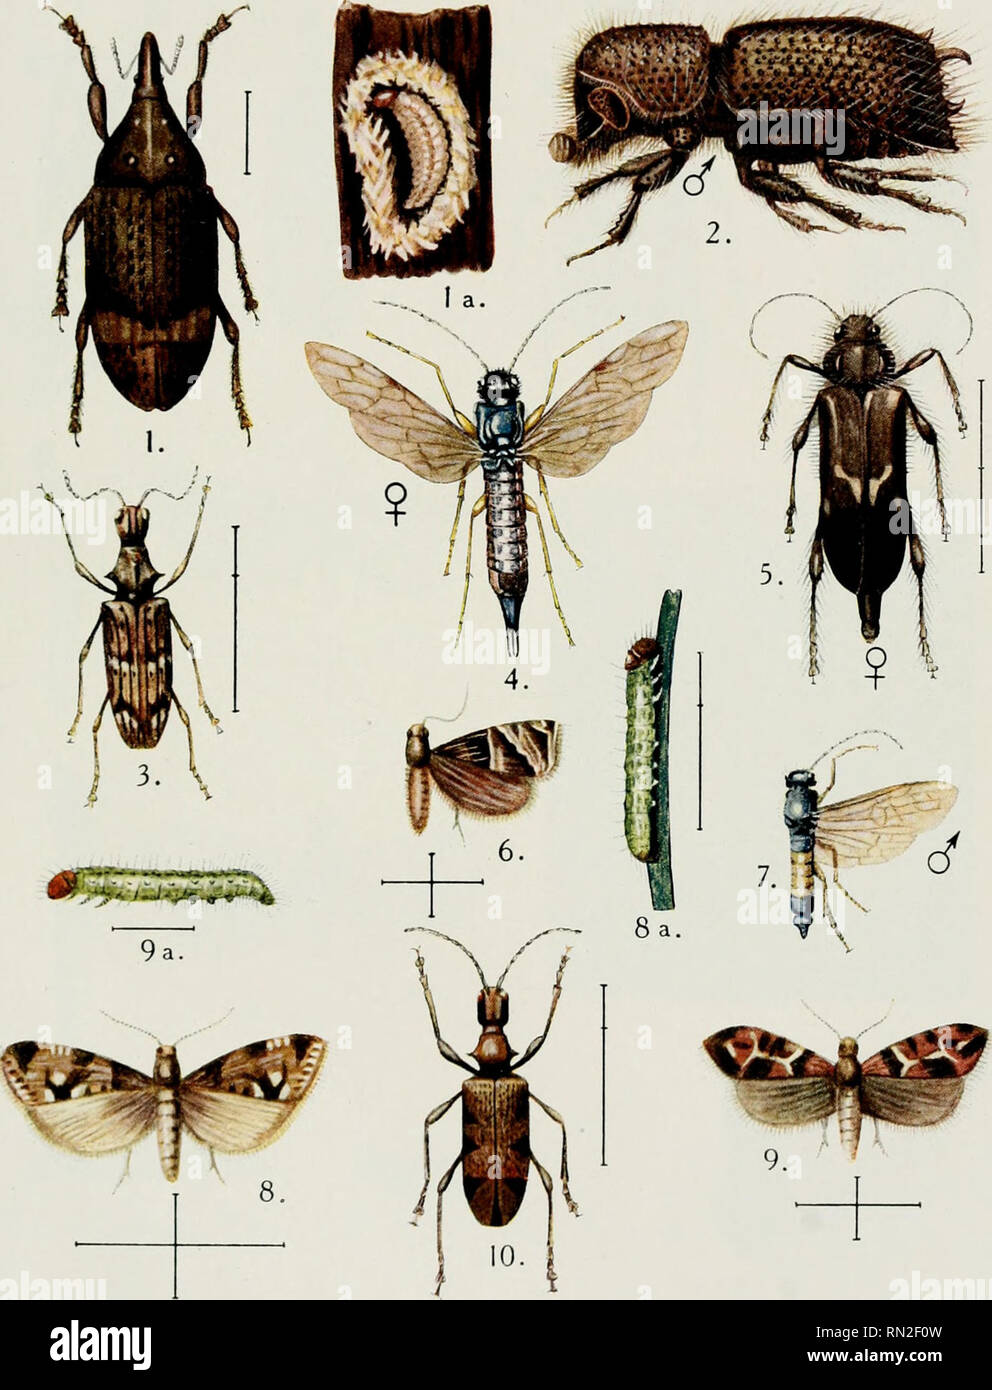 . Annales de la science agronomique franaise et trangre. Agriculture; Art -- France; Agriculture experiment stations -- France. Traité d'Entomologie Forestière PI. II.. A. BARBEY del. et pinx. 1, la. Pissodes piceae 11 — 4, 7. Sirex juvencus L. iS, 8a. Tortrix murinana Hbn. SADAG, imp. INSECTES DU SAPIN - 2. Tomicus curvidens Germ. — 3. Rhagium indigator Fabr. 5. Cerûmbyx bajulus L. — 6. Tortrix mgncana H. Scn. — 9,9a. Tortrix rufimitrana H. Sch. — 10. Rhagium inquisilor L.. Please note that these images are extracted from scanned page images that may have been digitally enhanced for readabili Stock Photo